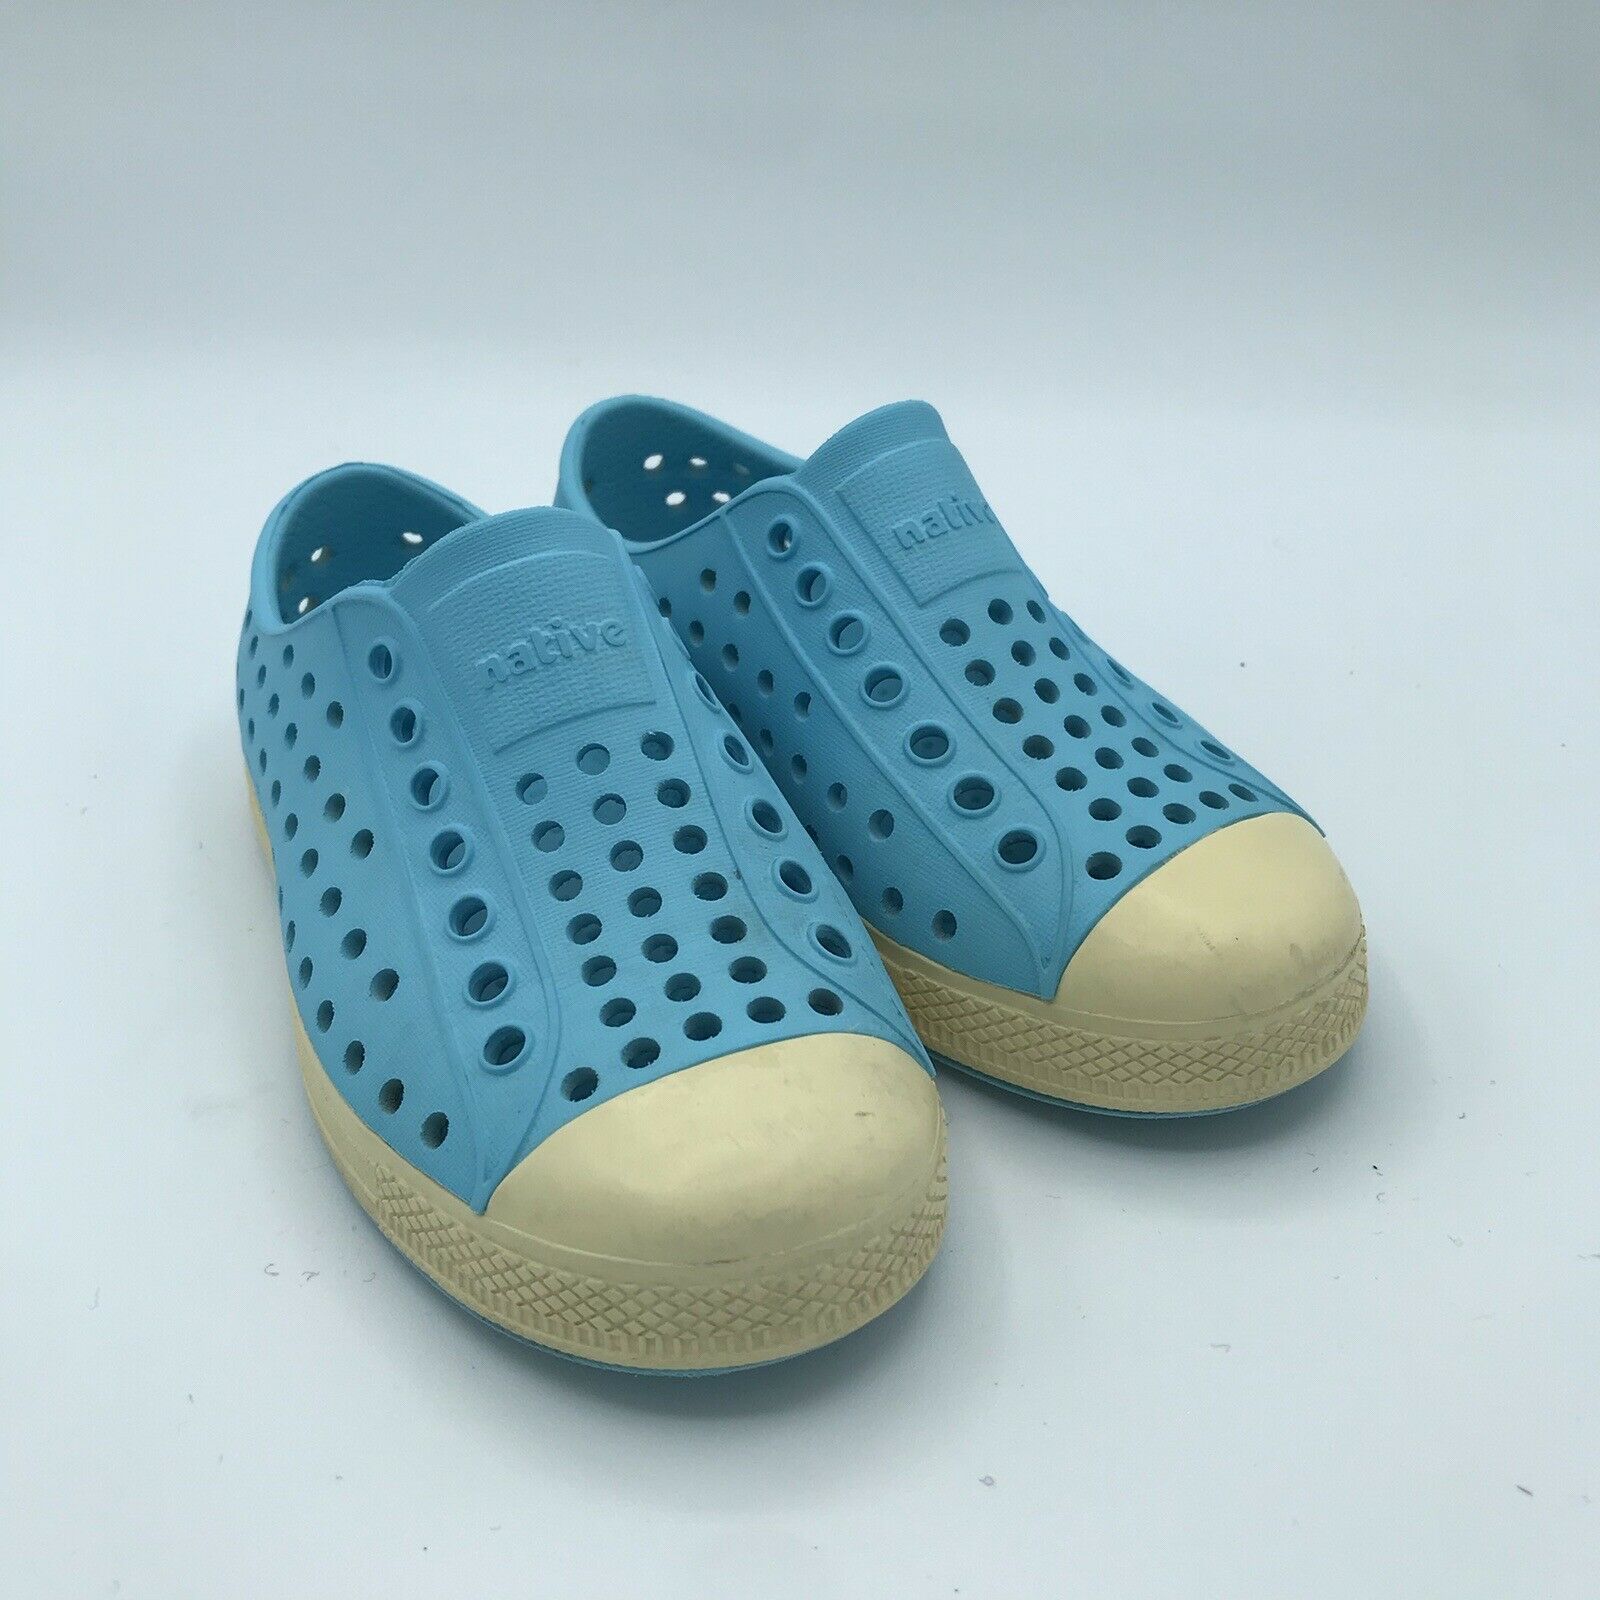 Native Jefferson Little Kids Toddler Blue Slip On Rubber Water Shoes Size C9